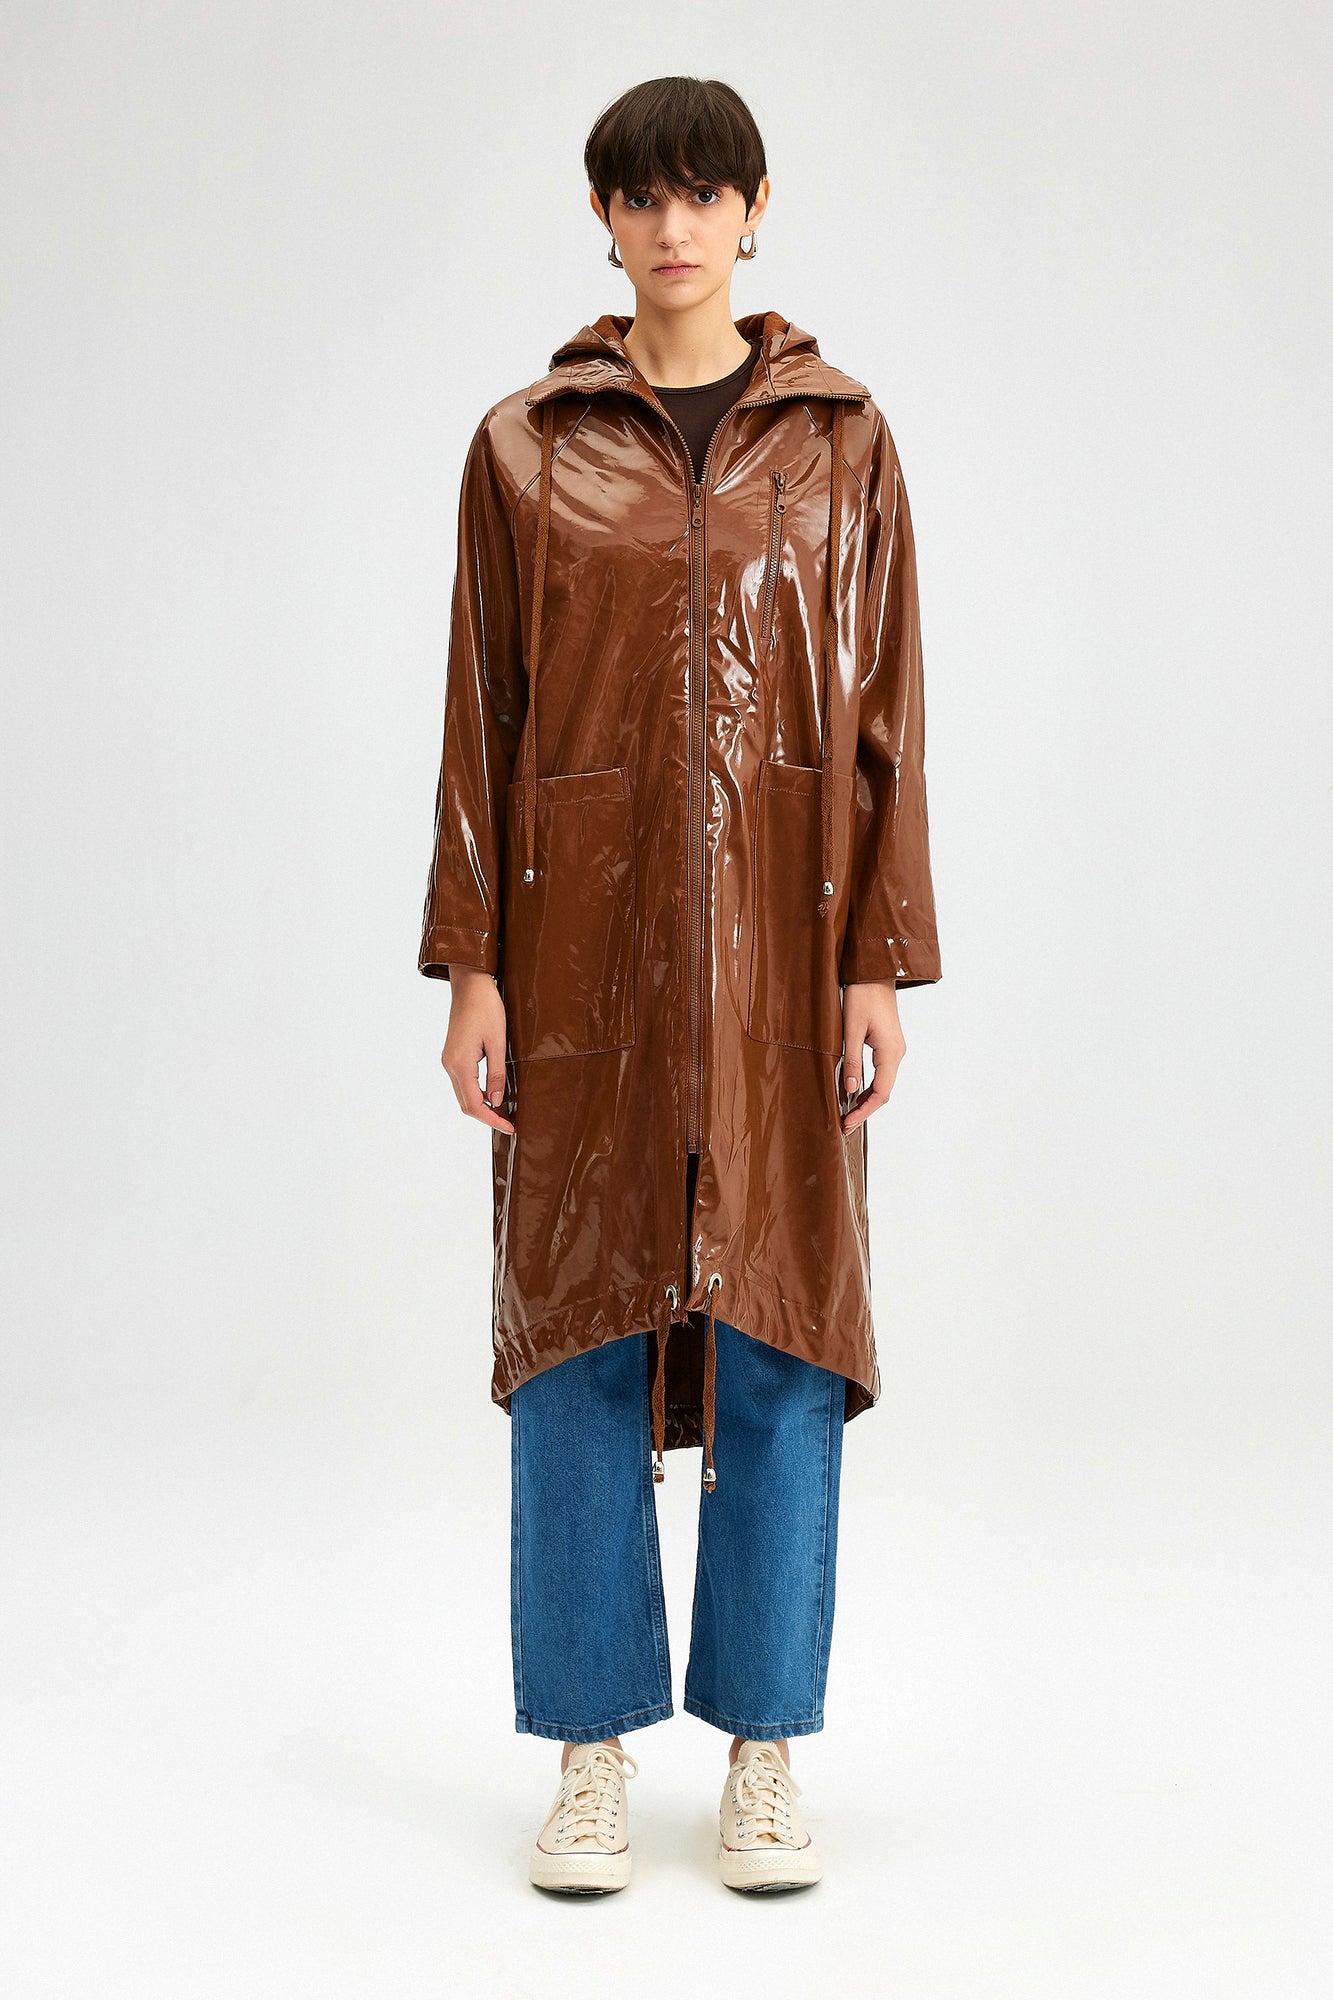 A wholesale clothing model wears Patterned Leather Coat With Hoodie - Camel, Turkish wholesale Raincoat of Touche Prive